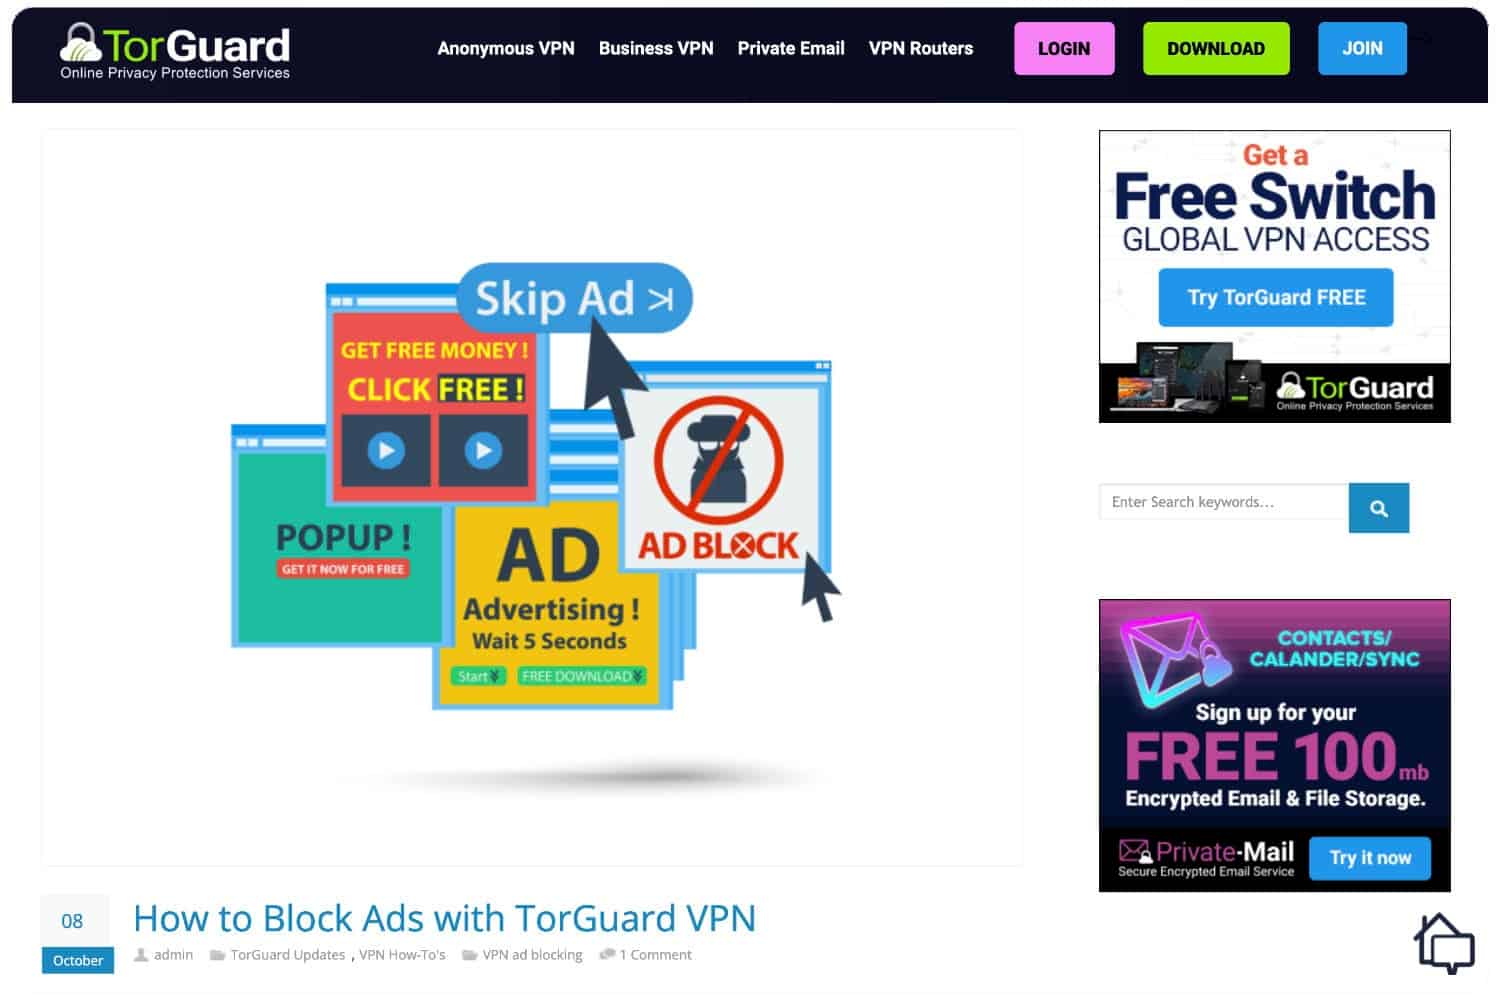 TorGuard’s ad blocker works great except on its own website.